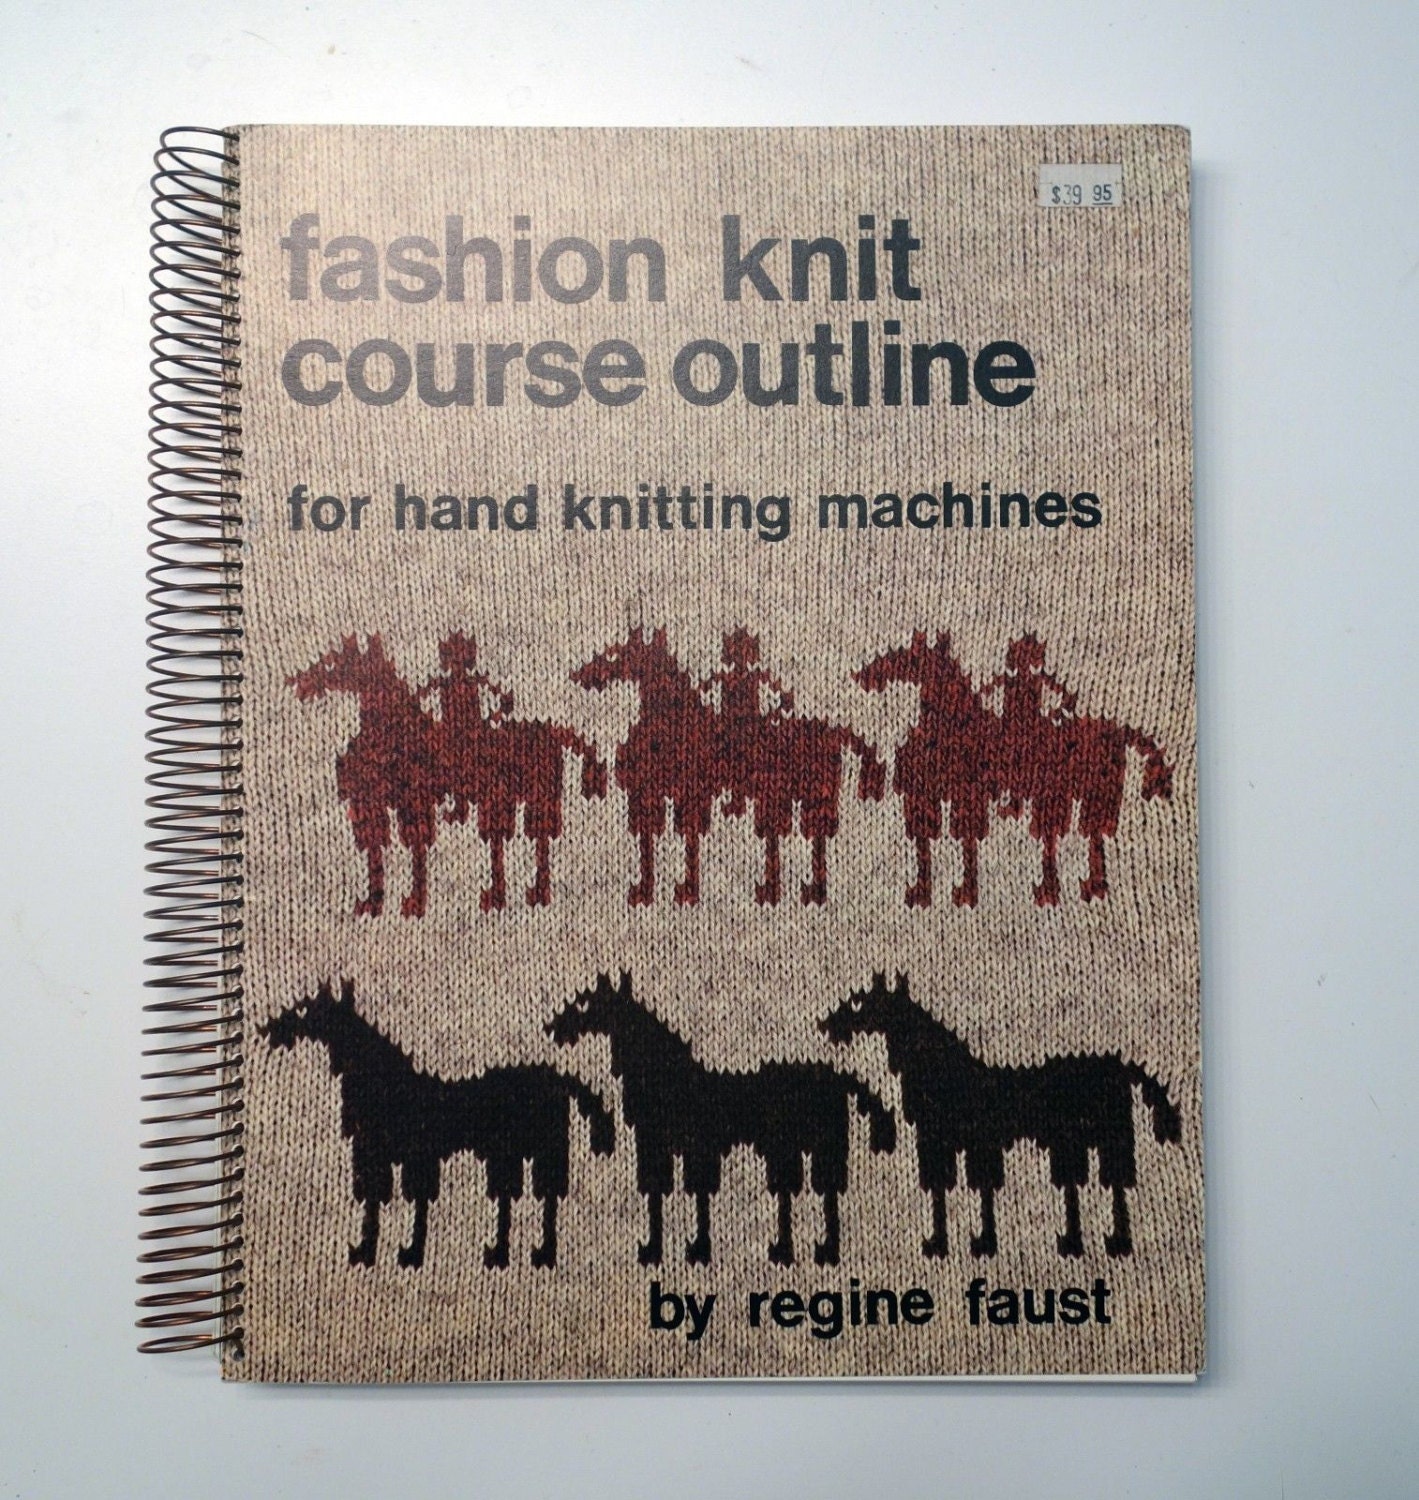 Machine Knitting Fashion Course Outline For Hand Knitting